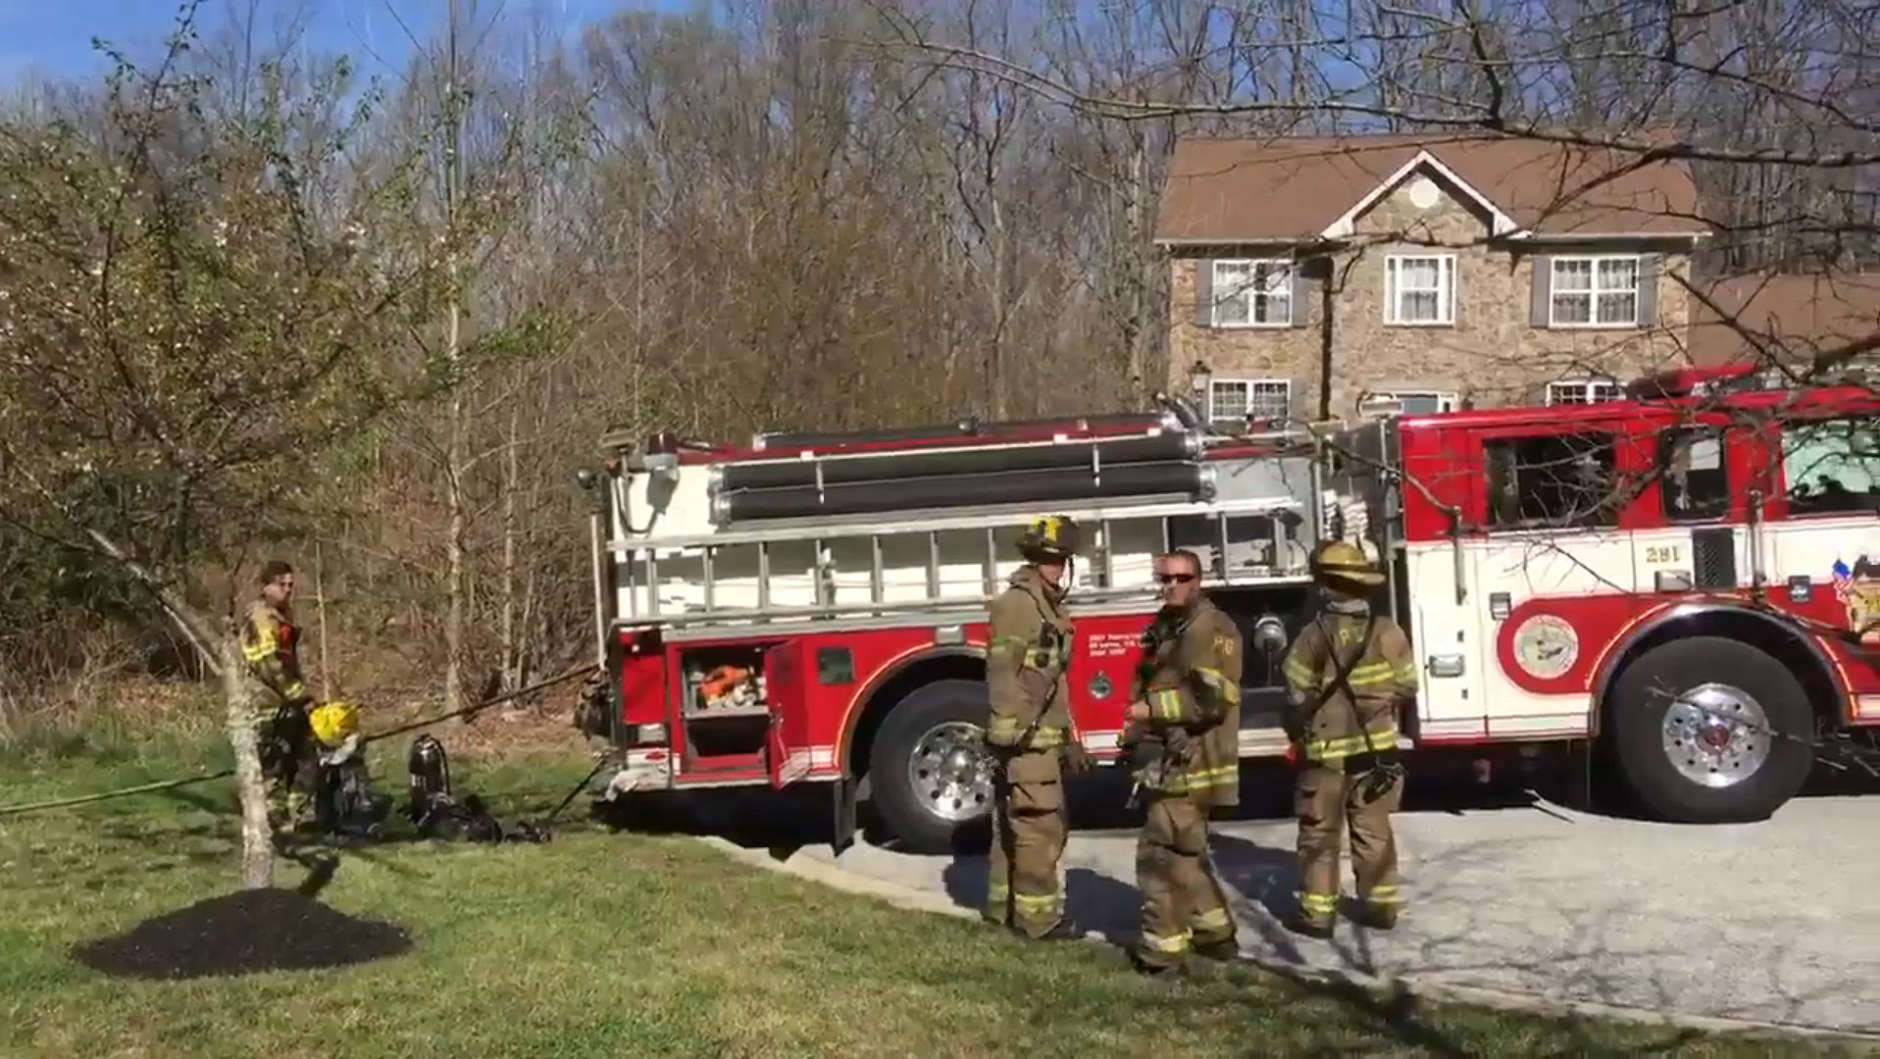 Prince George's County firefighters arrive at the scene of a fighter jet crash off Temple Hill Road in Clinton, Maryland in this screen grab from a courtesy video on April 5, 2017. (Courtesy Prince George's County Fire)